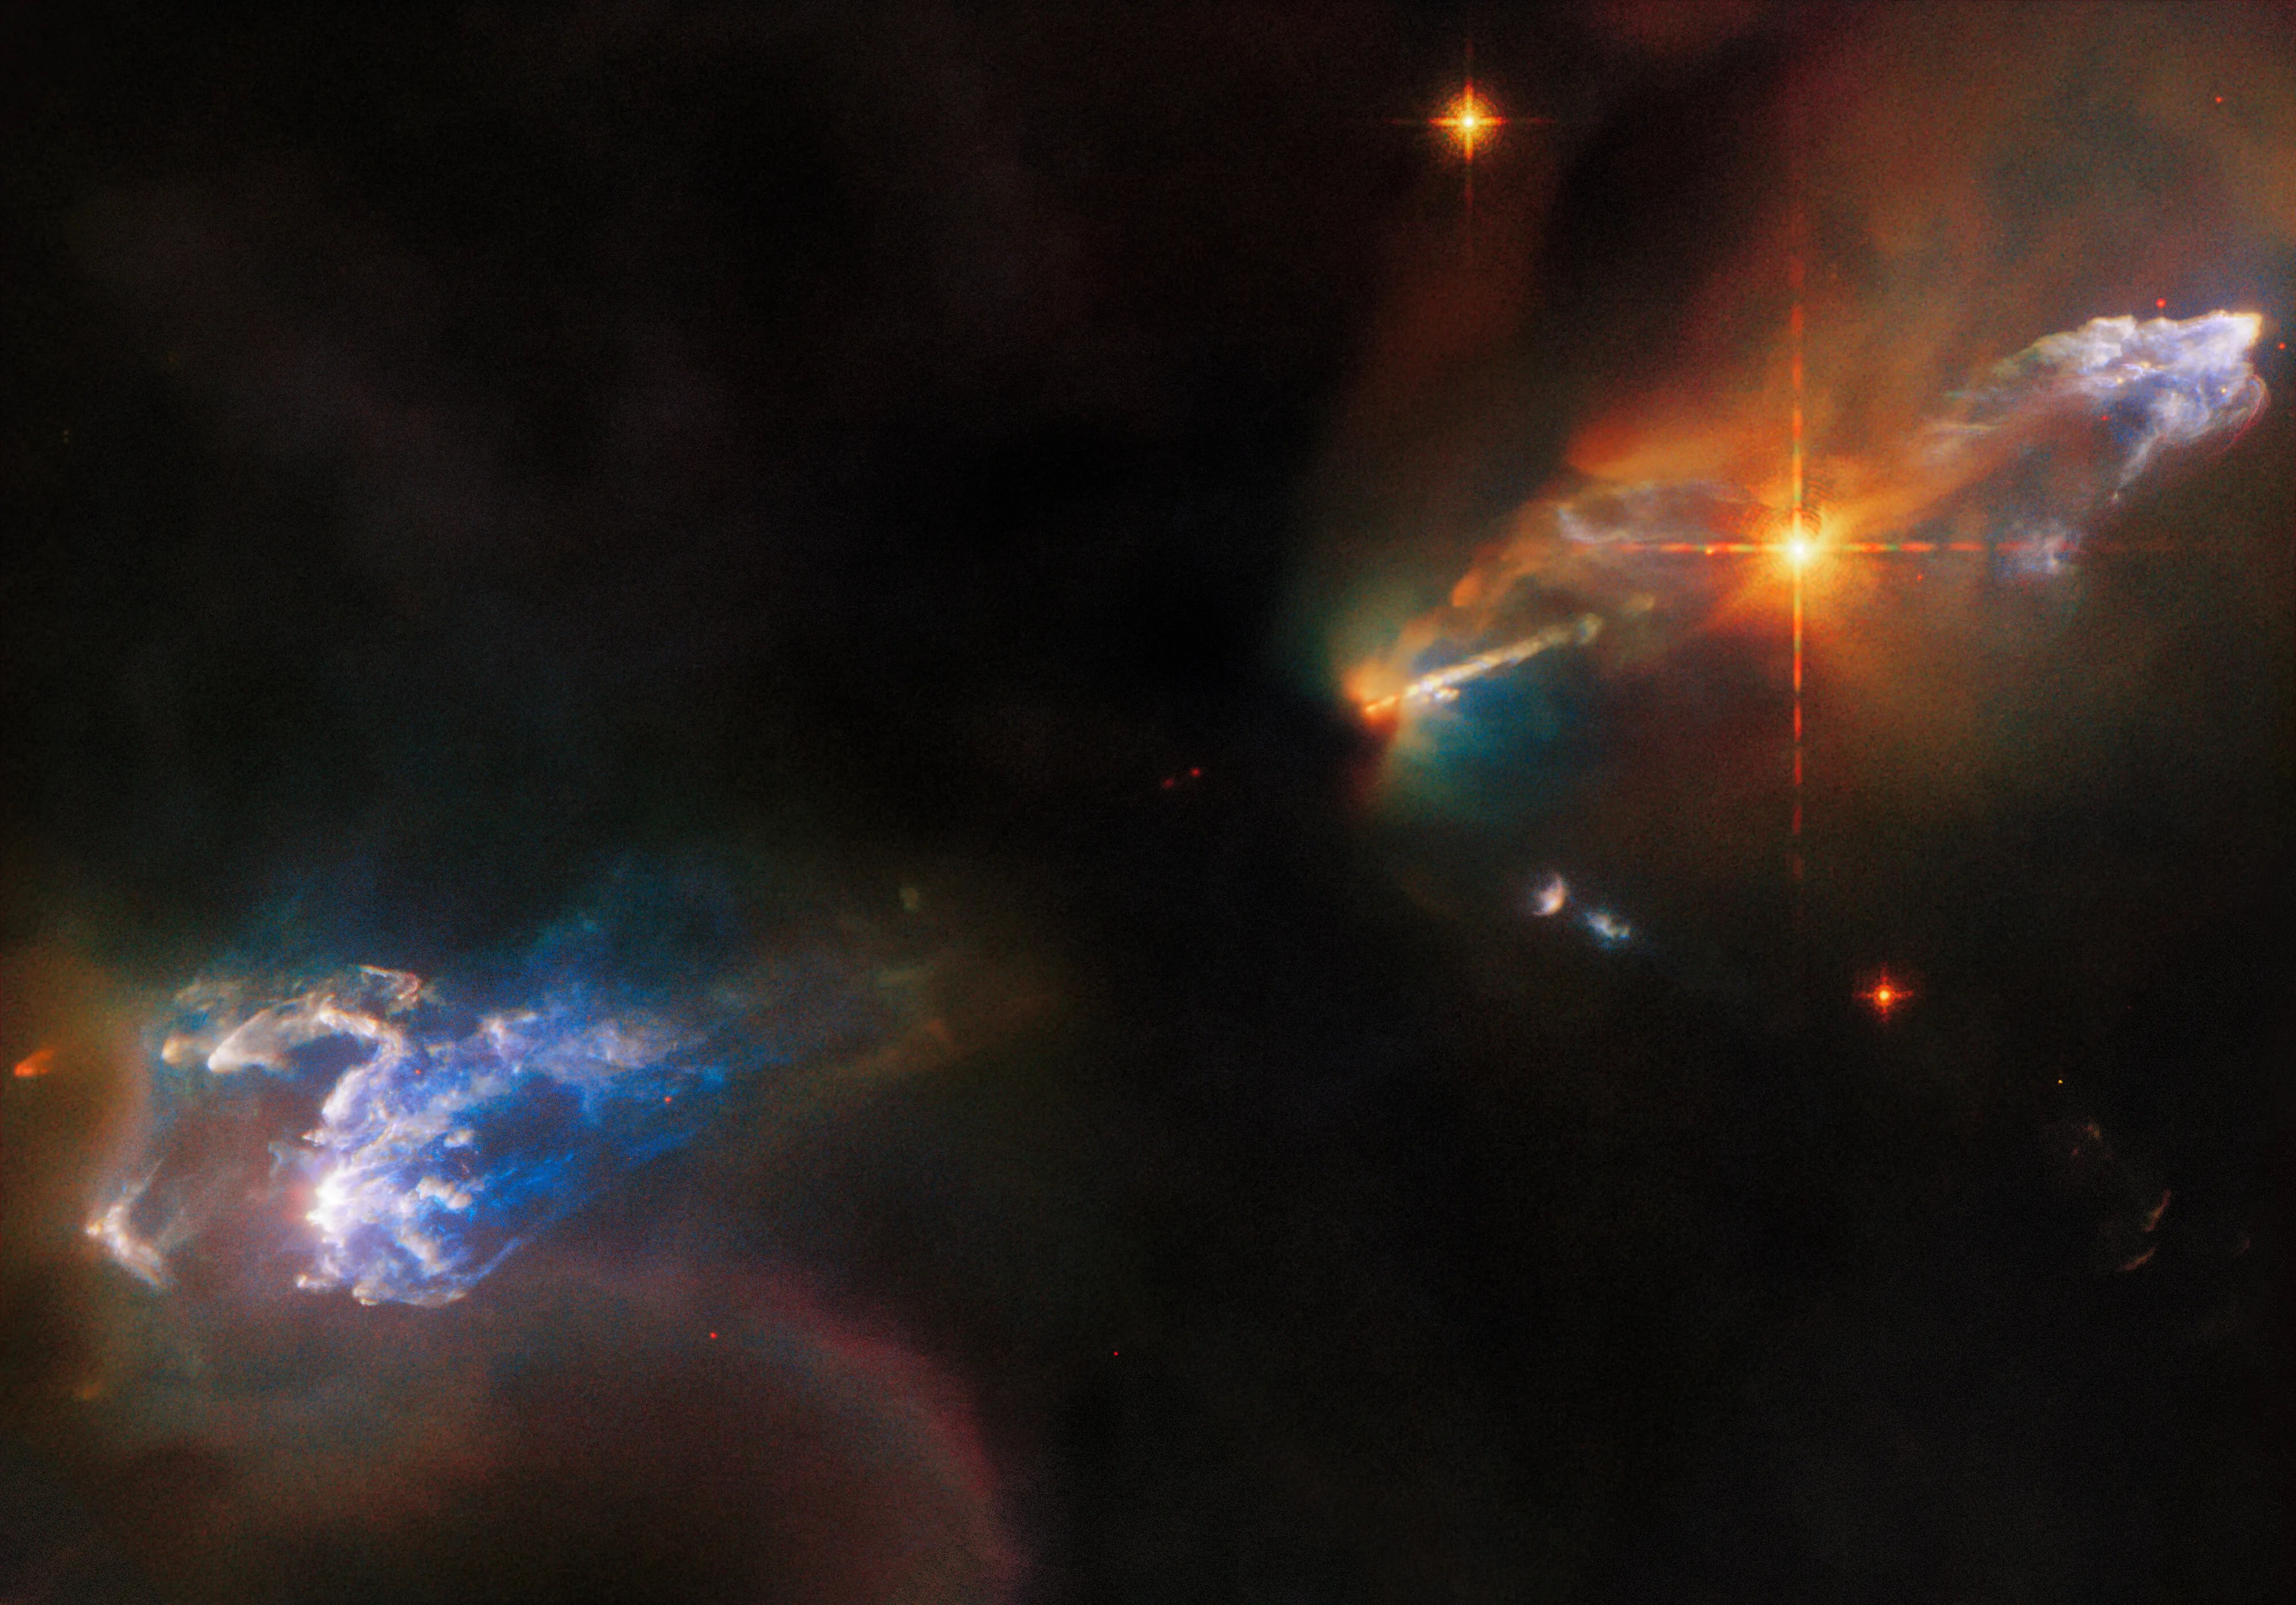 2 wispy, light blue, gas clouds: hh 1 upper right, hh 2 lower left. both surrounded by dimmer, multi-colored clouds with dark-black background. very bright orange star lower left of hh 1. beyond that star, narrow jet emerging from the dark image center.